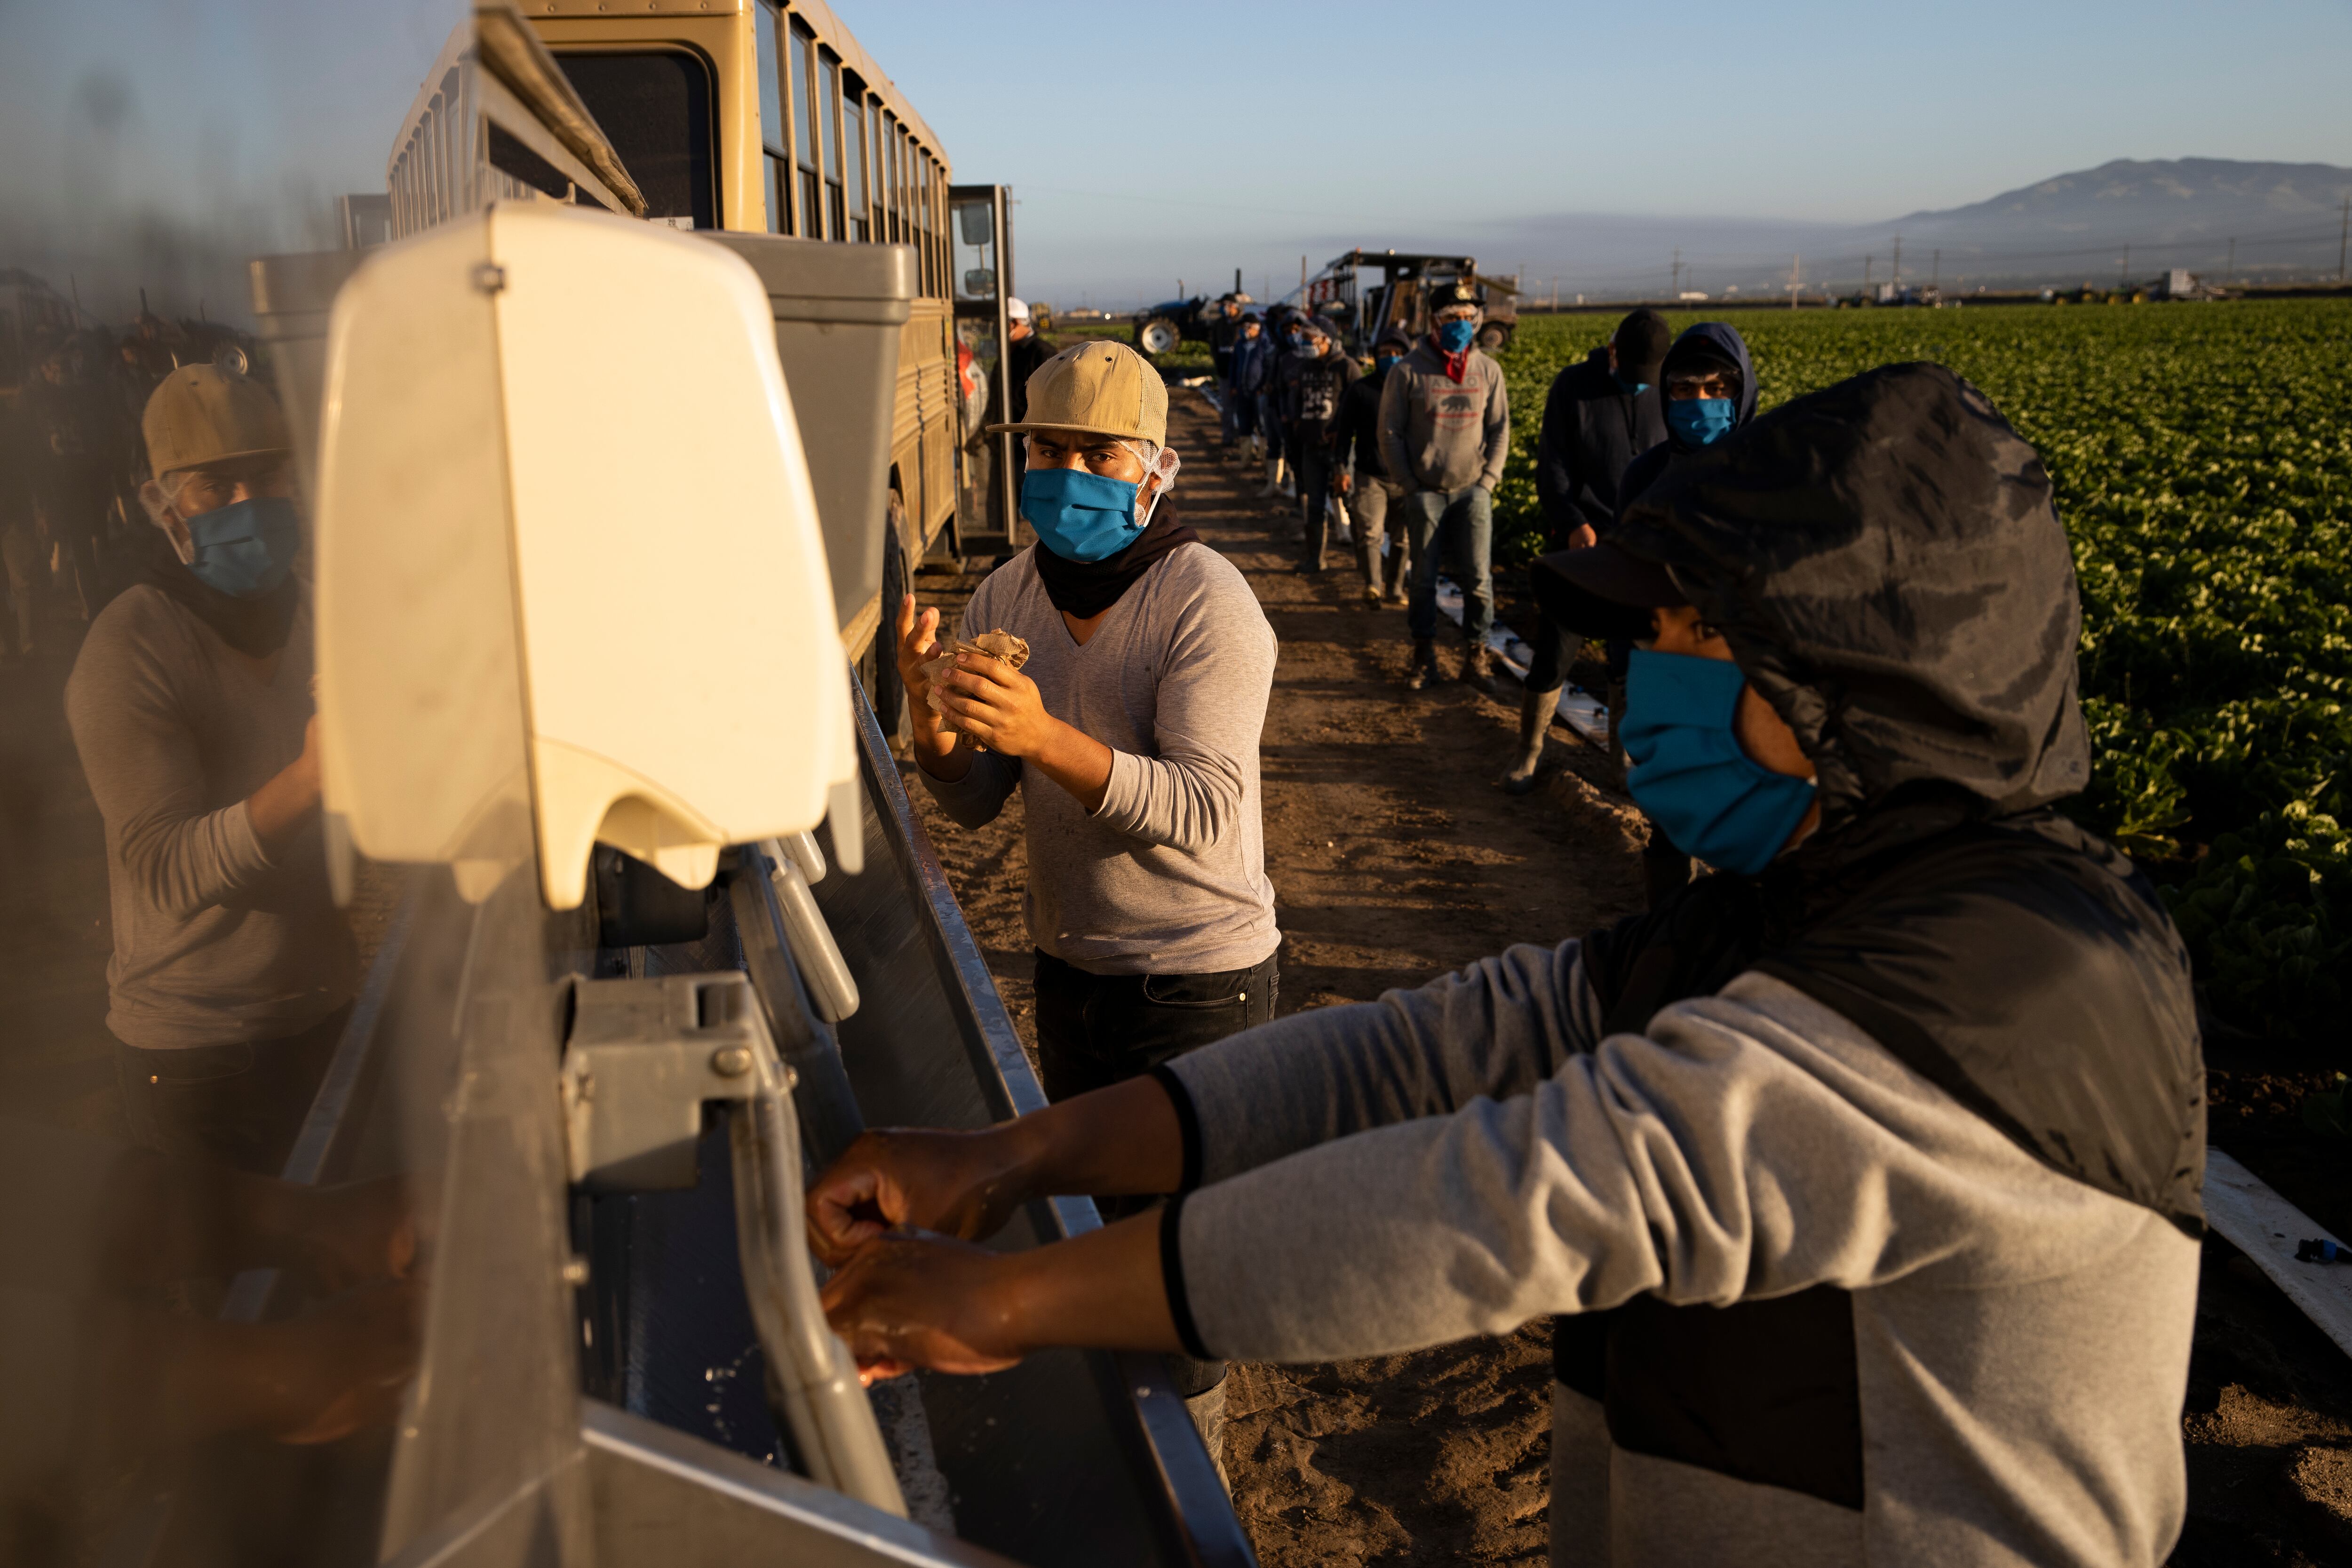 H-2a visa holders wash their hands before working in a field in Greenfield, California, in April 2020.